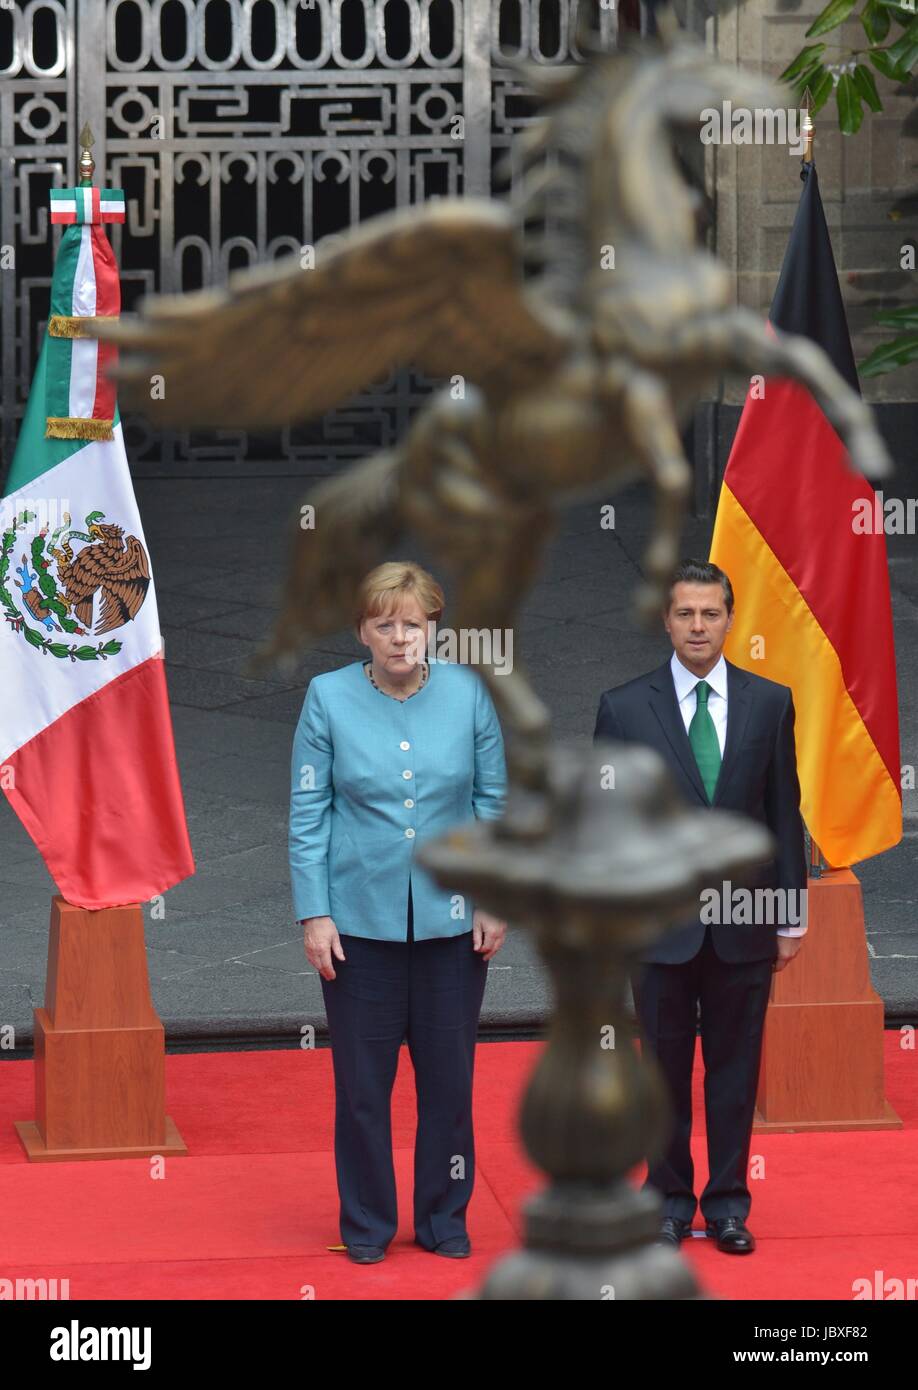 Mexican President Enrique Pena Nieto welcomes German Chancellor Angela Merkel to the National Palace at Los Pinos during the arrival ceremony June 9, 2017 in Mexico City, Mexico. Stock Photo